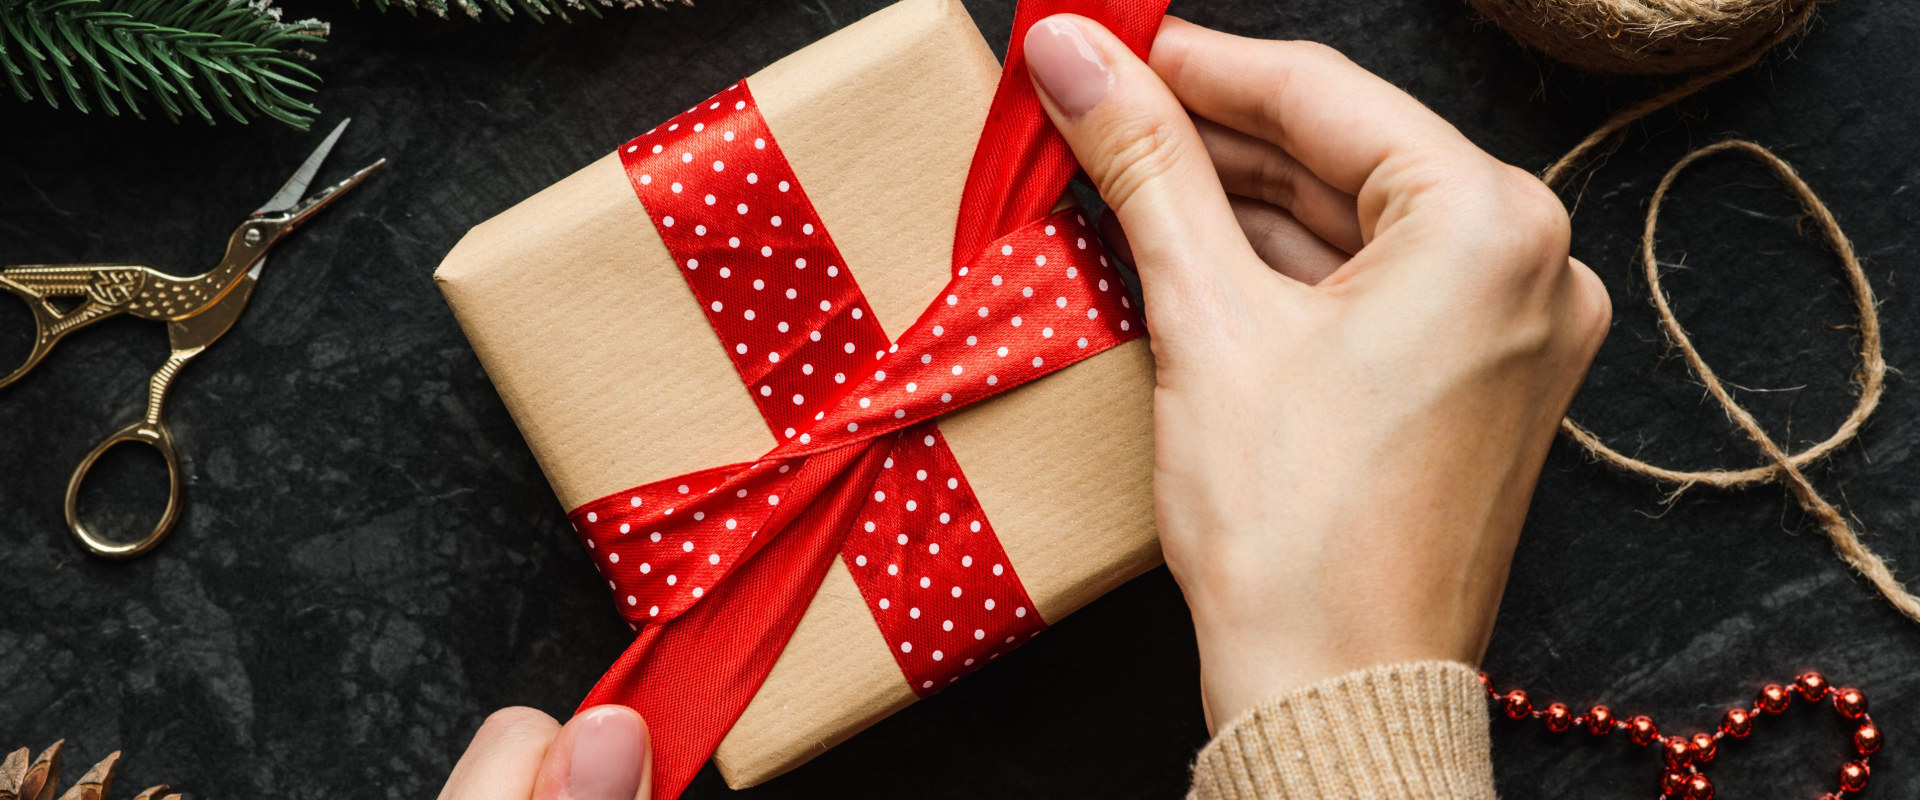 Where to wrap christmas gifts?